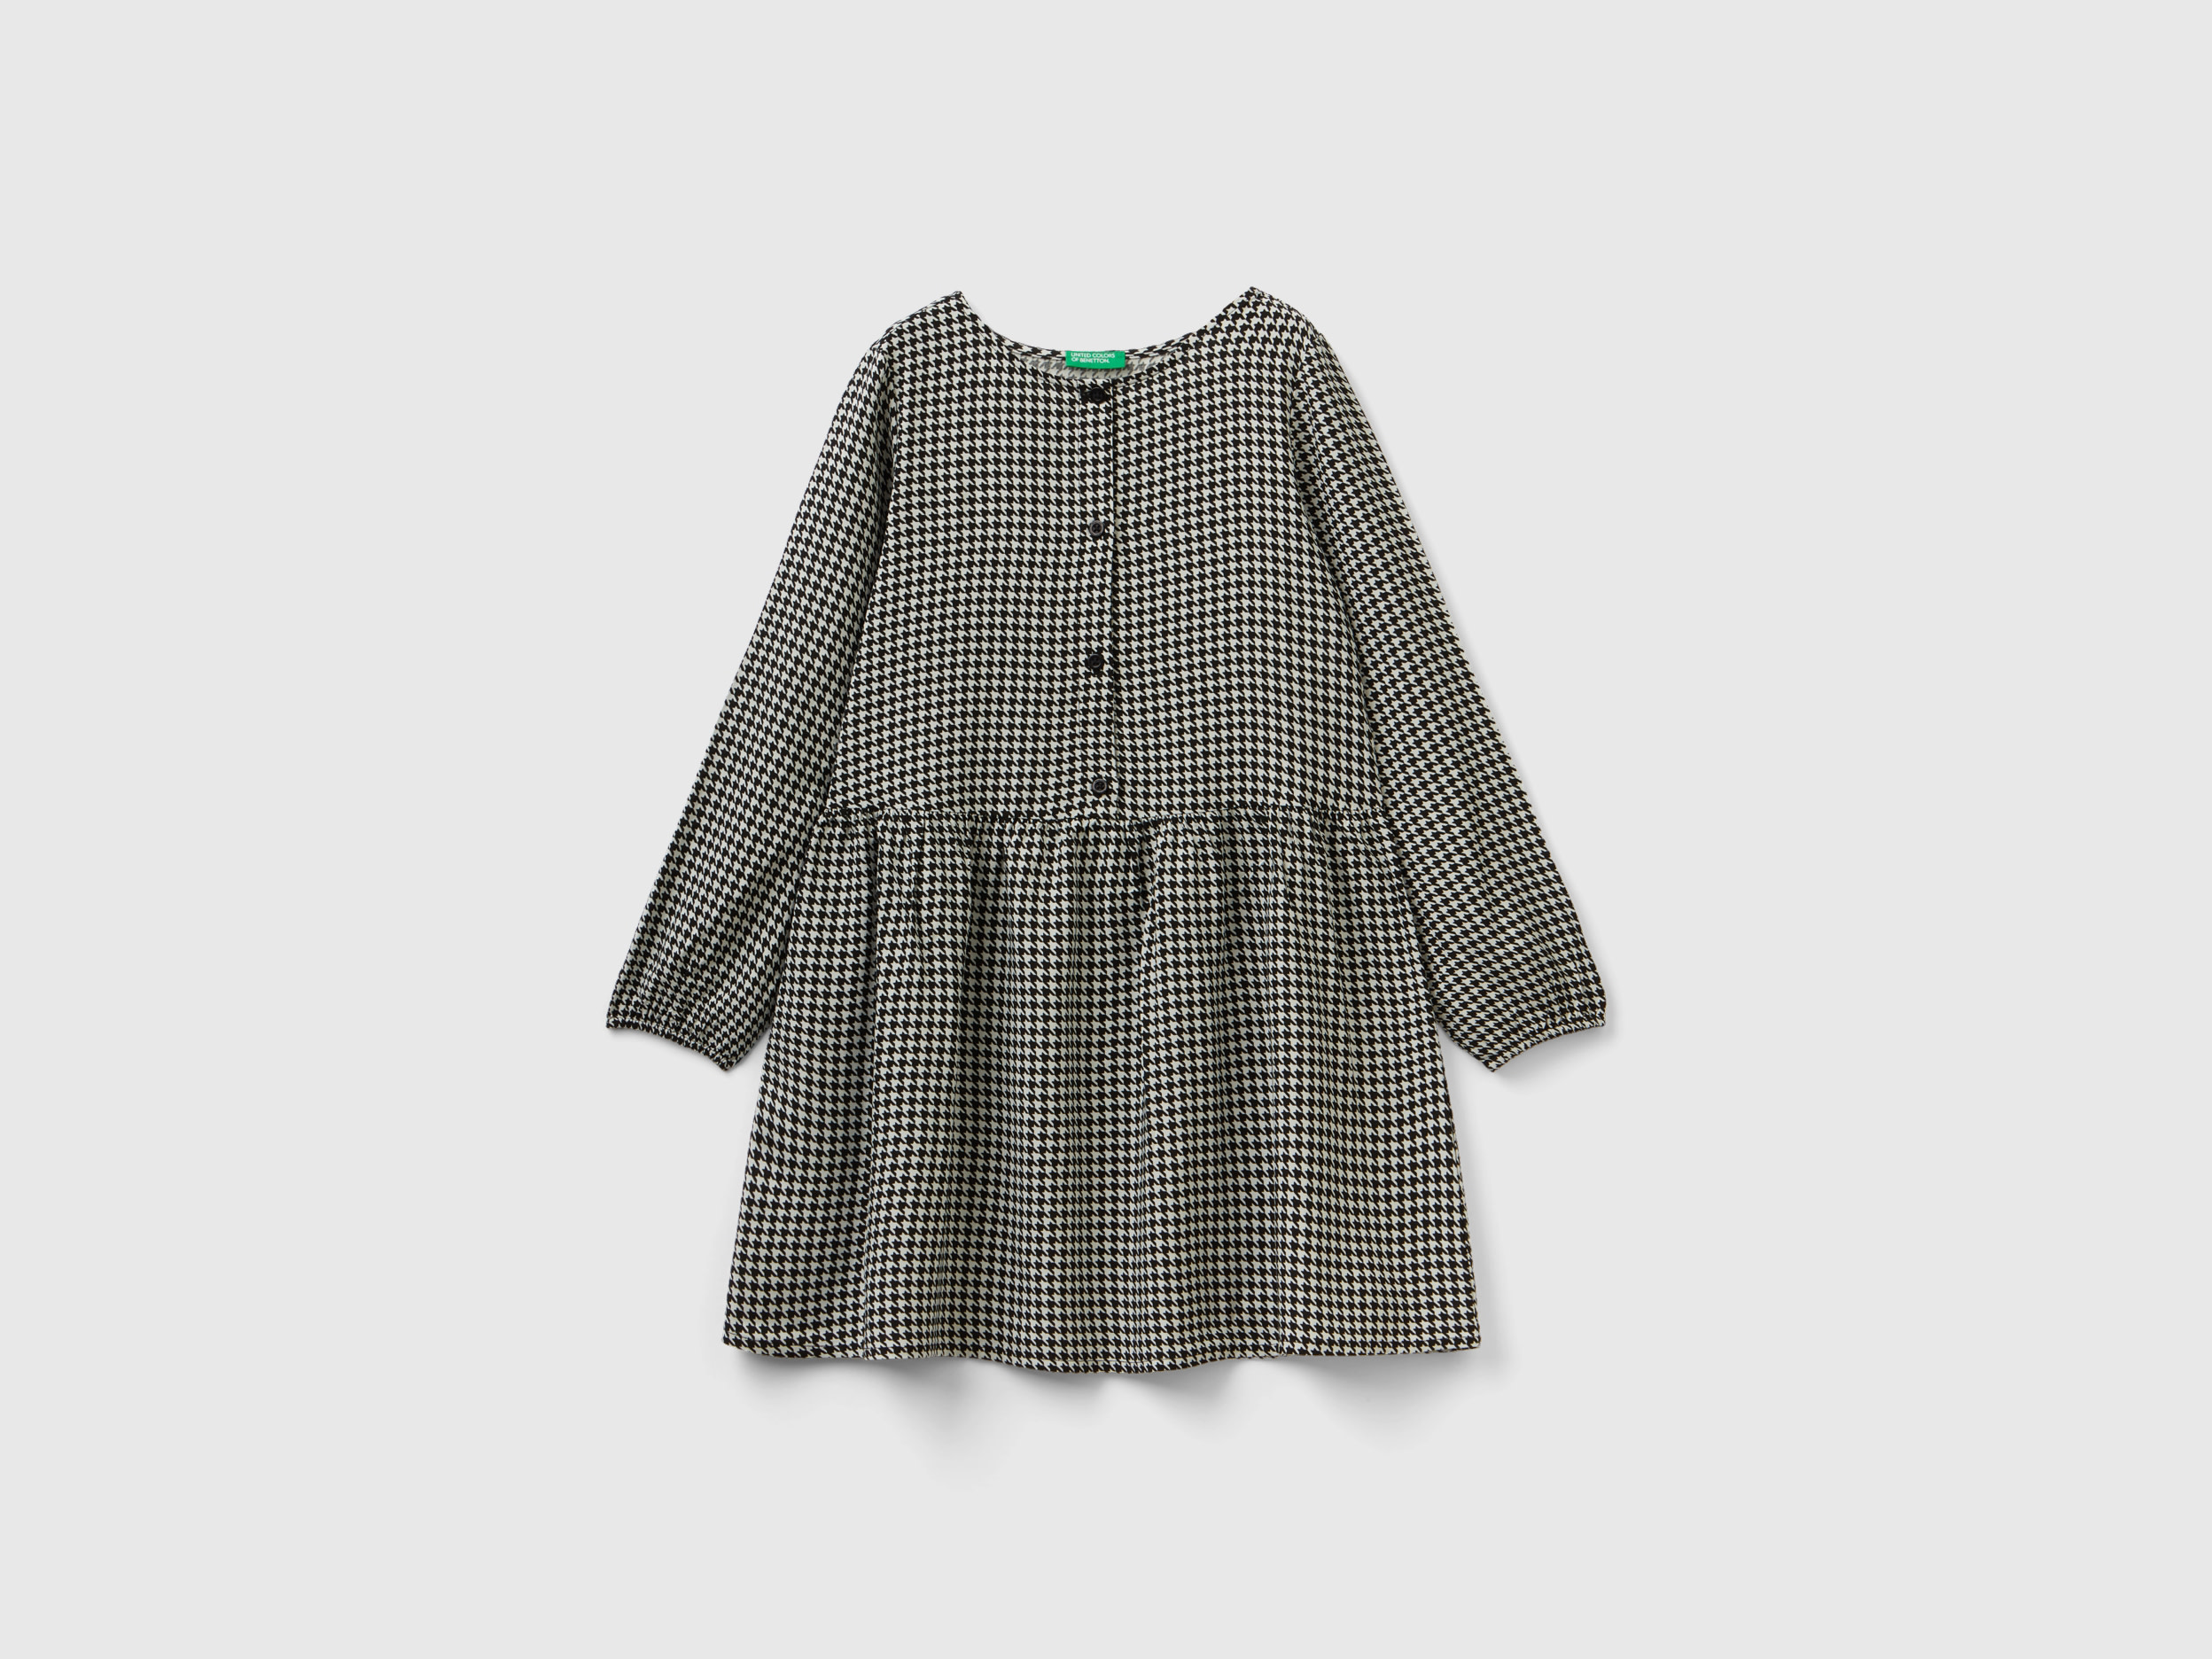 Benetton, Houndstooth Dress In Sustainable Viscose, size 2XL, Black, Kids